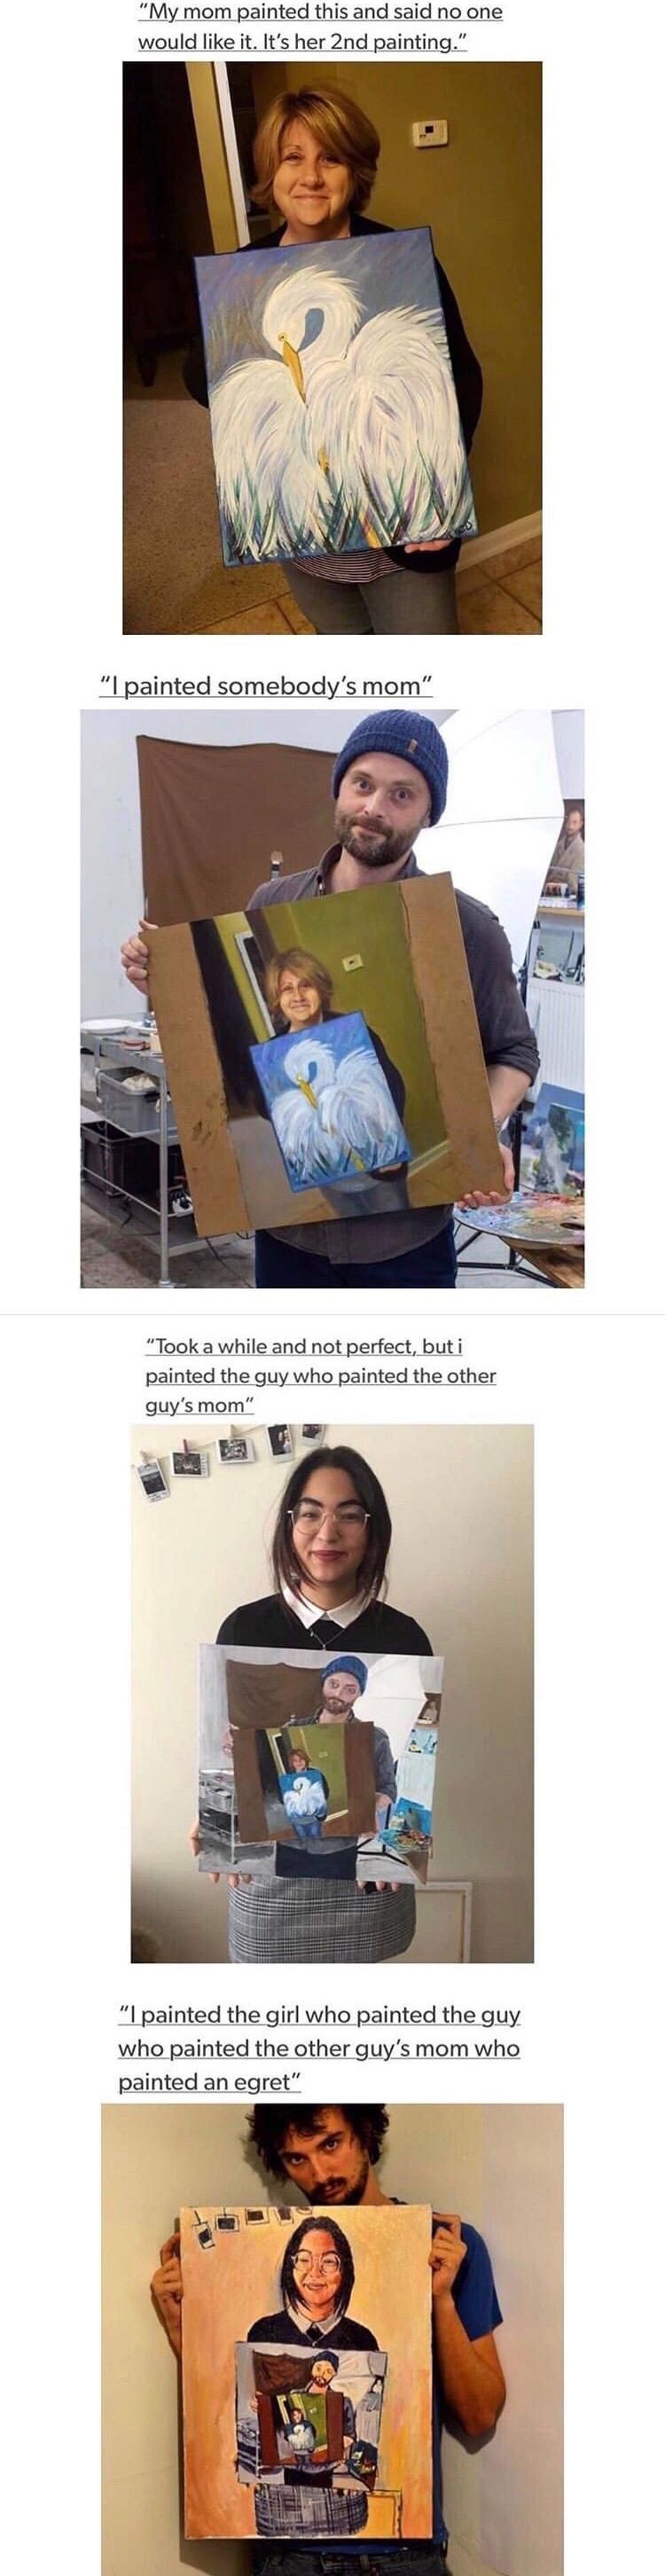 Some talented painters that have too much time